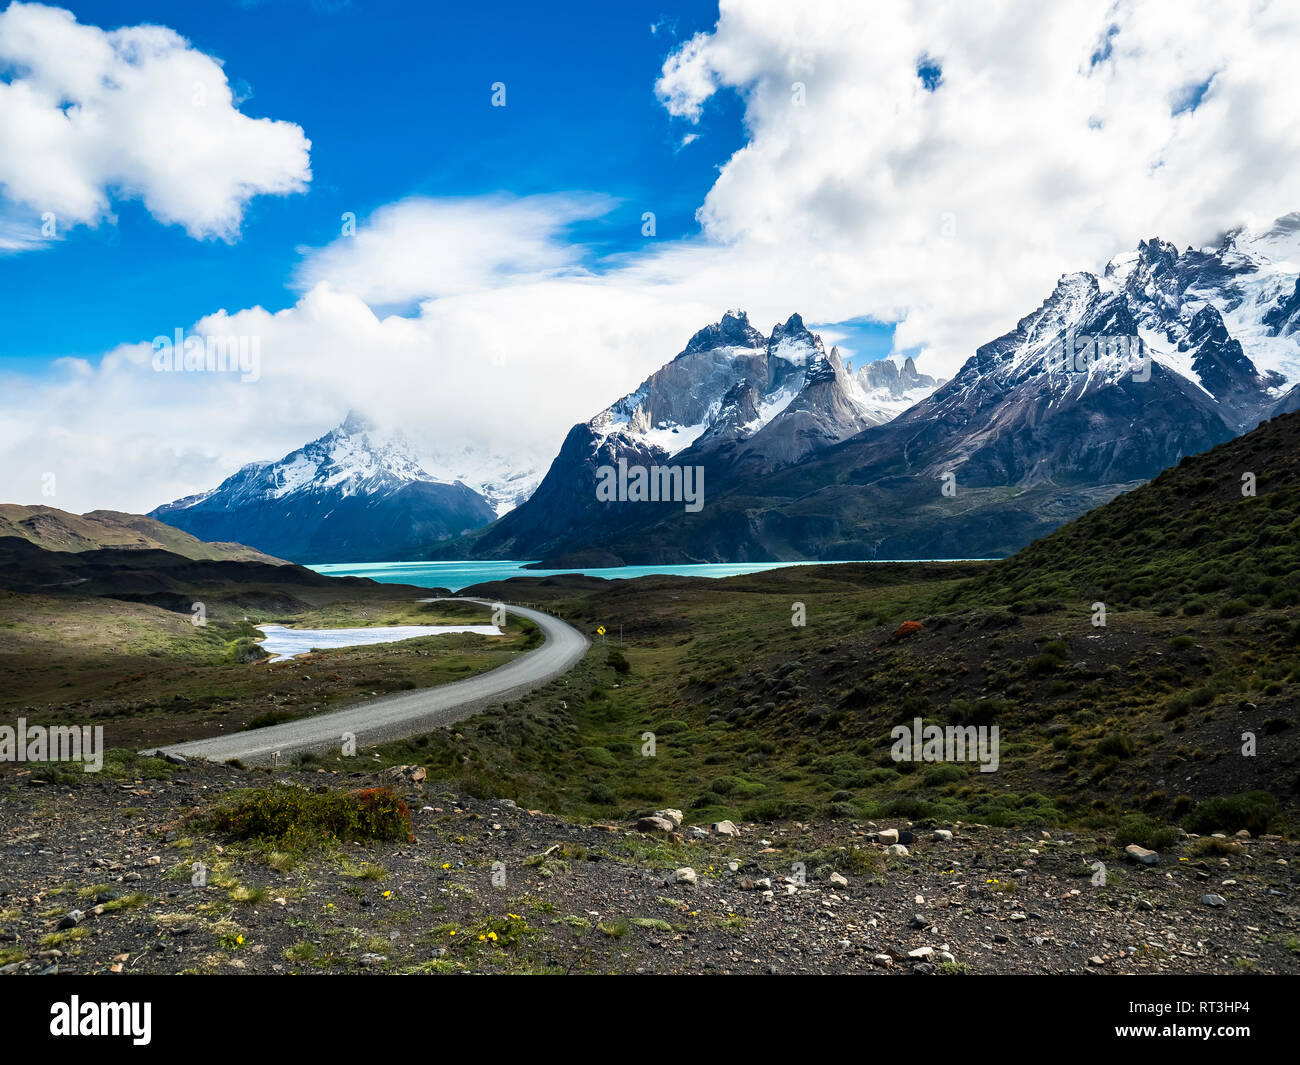 Chile, Patagonien, Torres del Paine Nationalpark, Cerro Paine Grande und Torres del Paine, Lago Nordenskjold Stockfoto